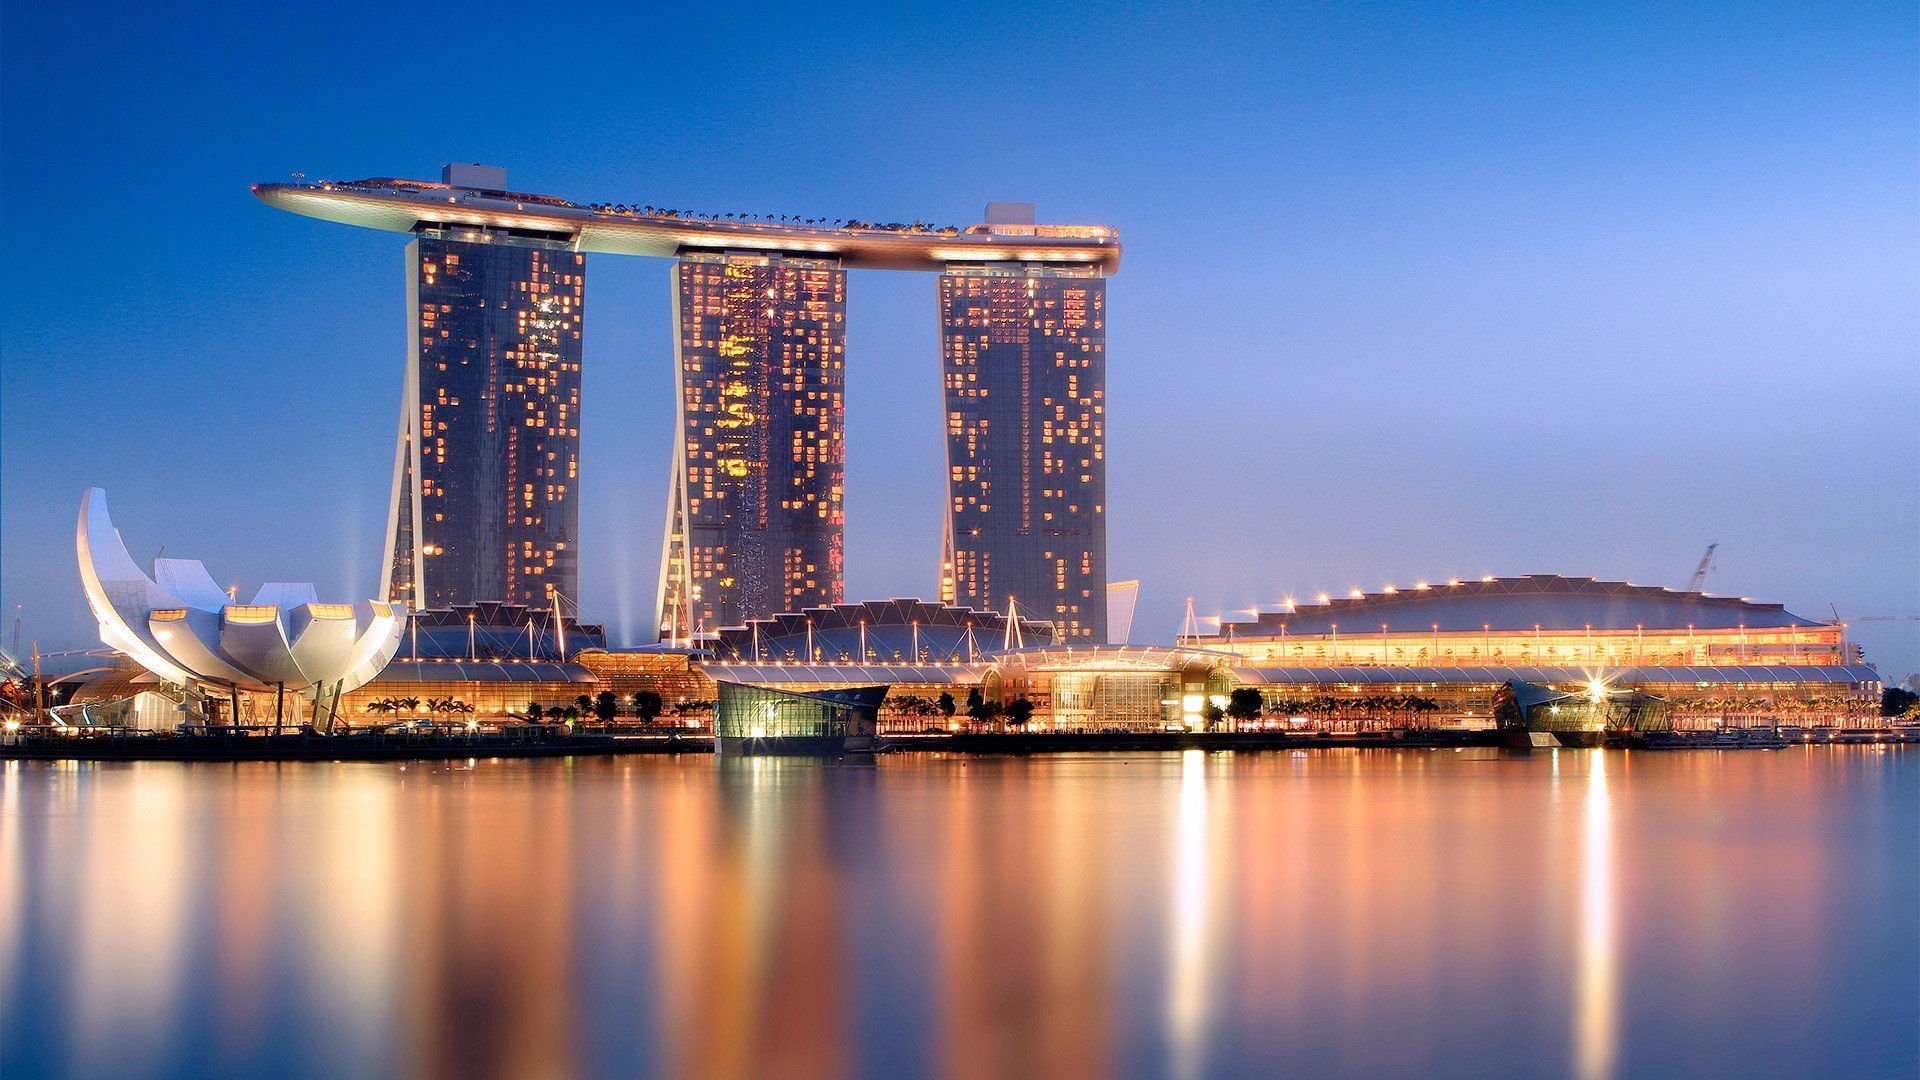 Las Vegas Sands launches $1M scholarship program to boost hospitality careers in Singapore